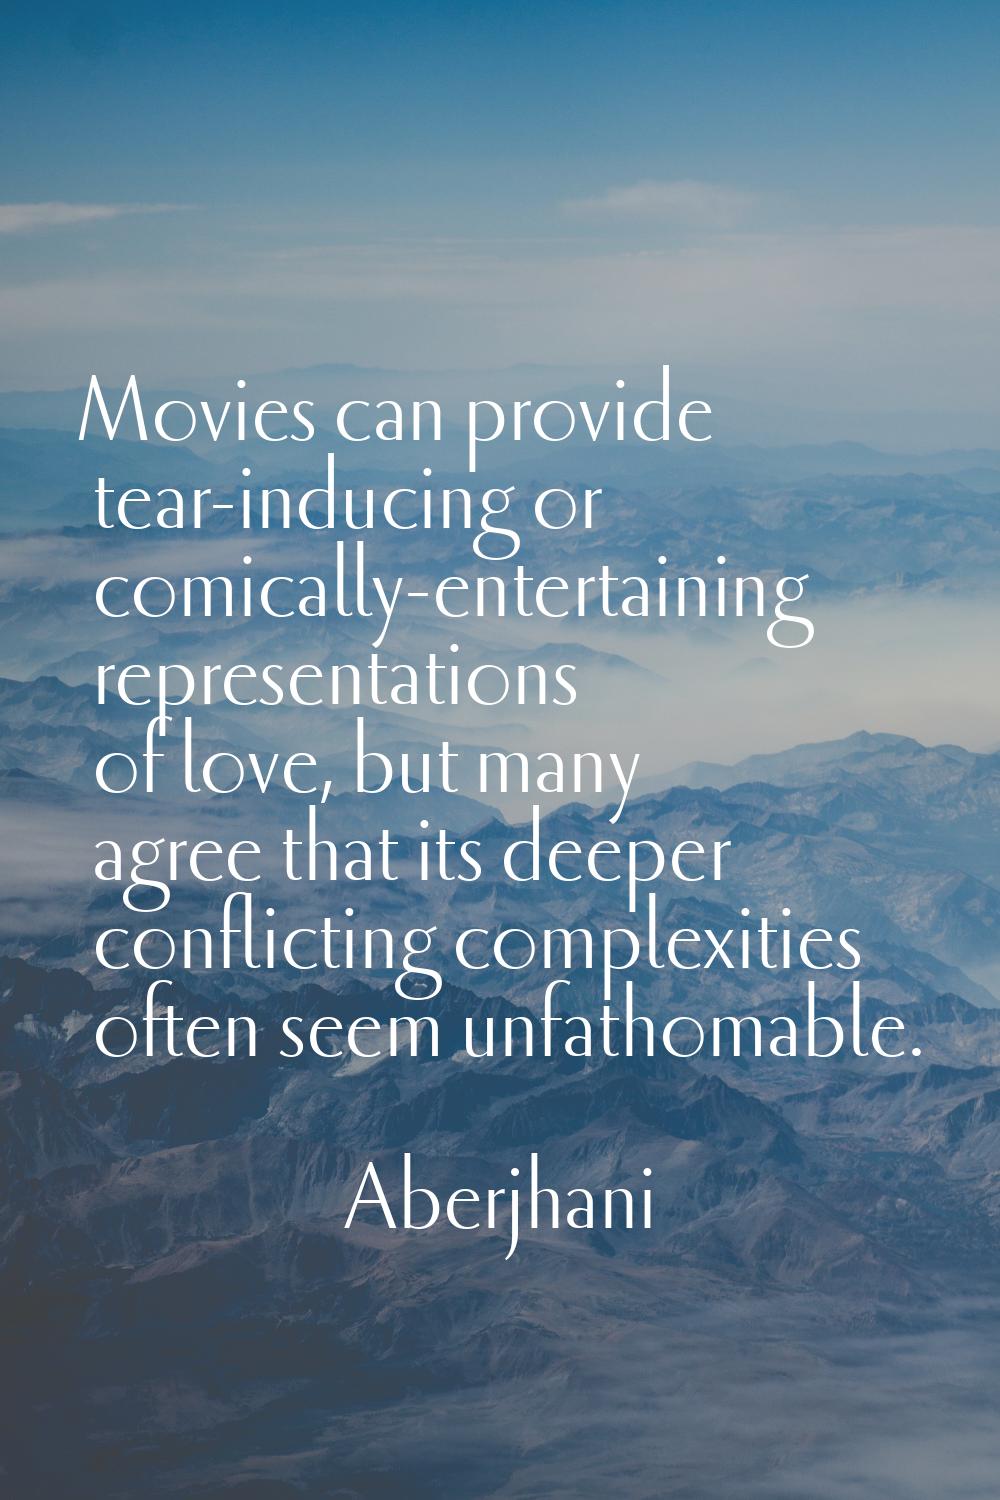 Movies can provide tear-inducing or comically-entertaining representations of love, but many agree 